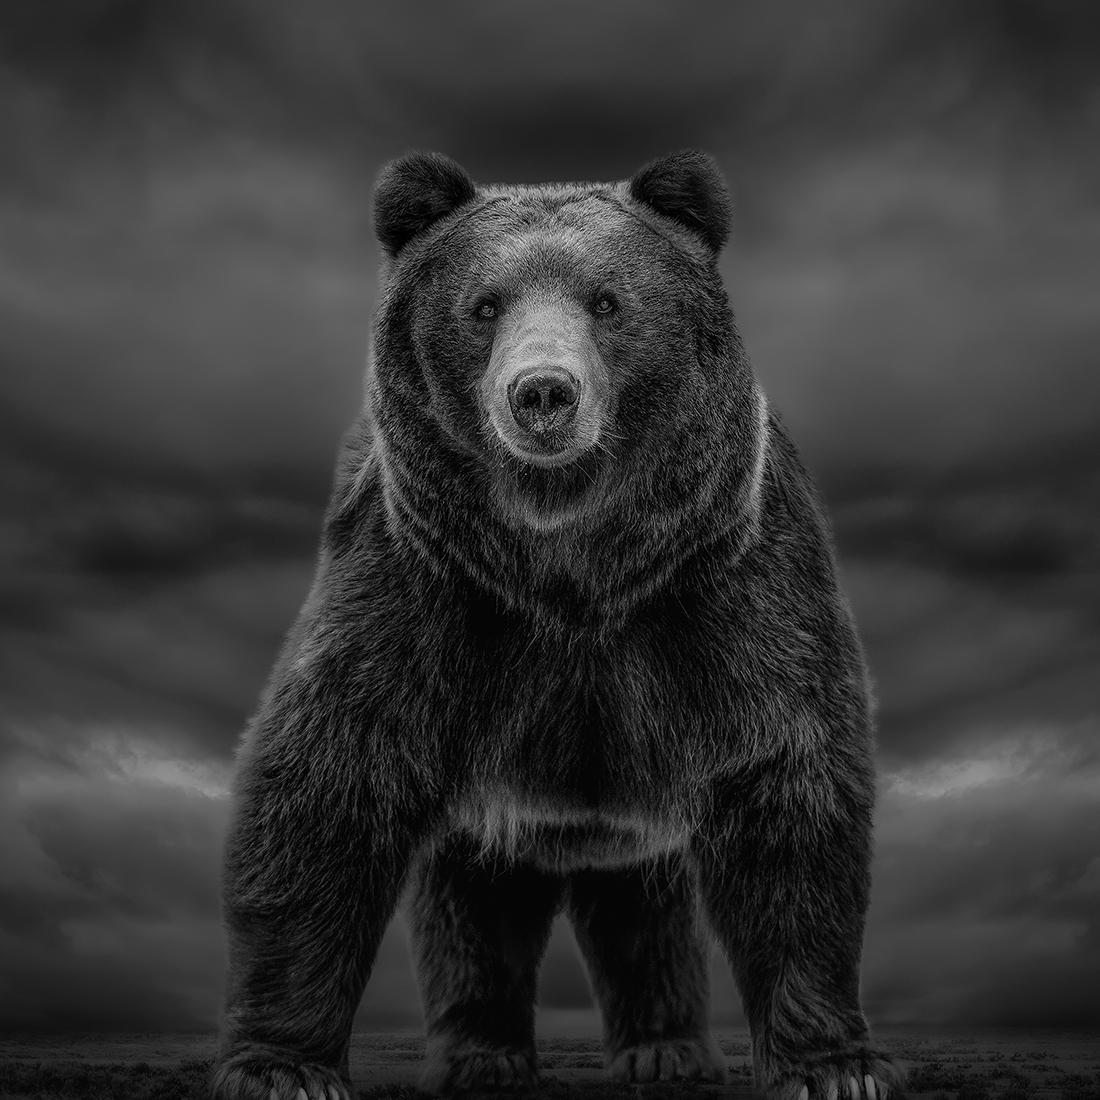 Shane Russeck Black and White Photograph - "Times Like These"  40x40  Black & White Photography, Grizzly Bear Photograph